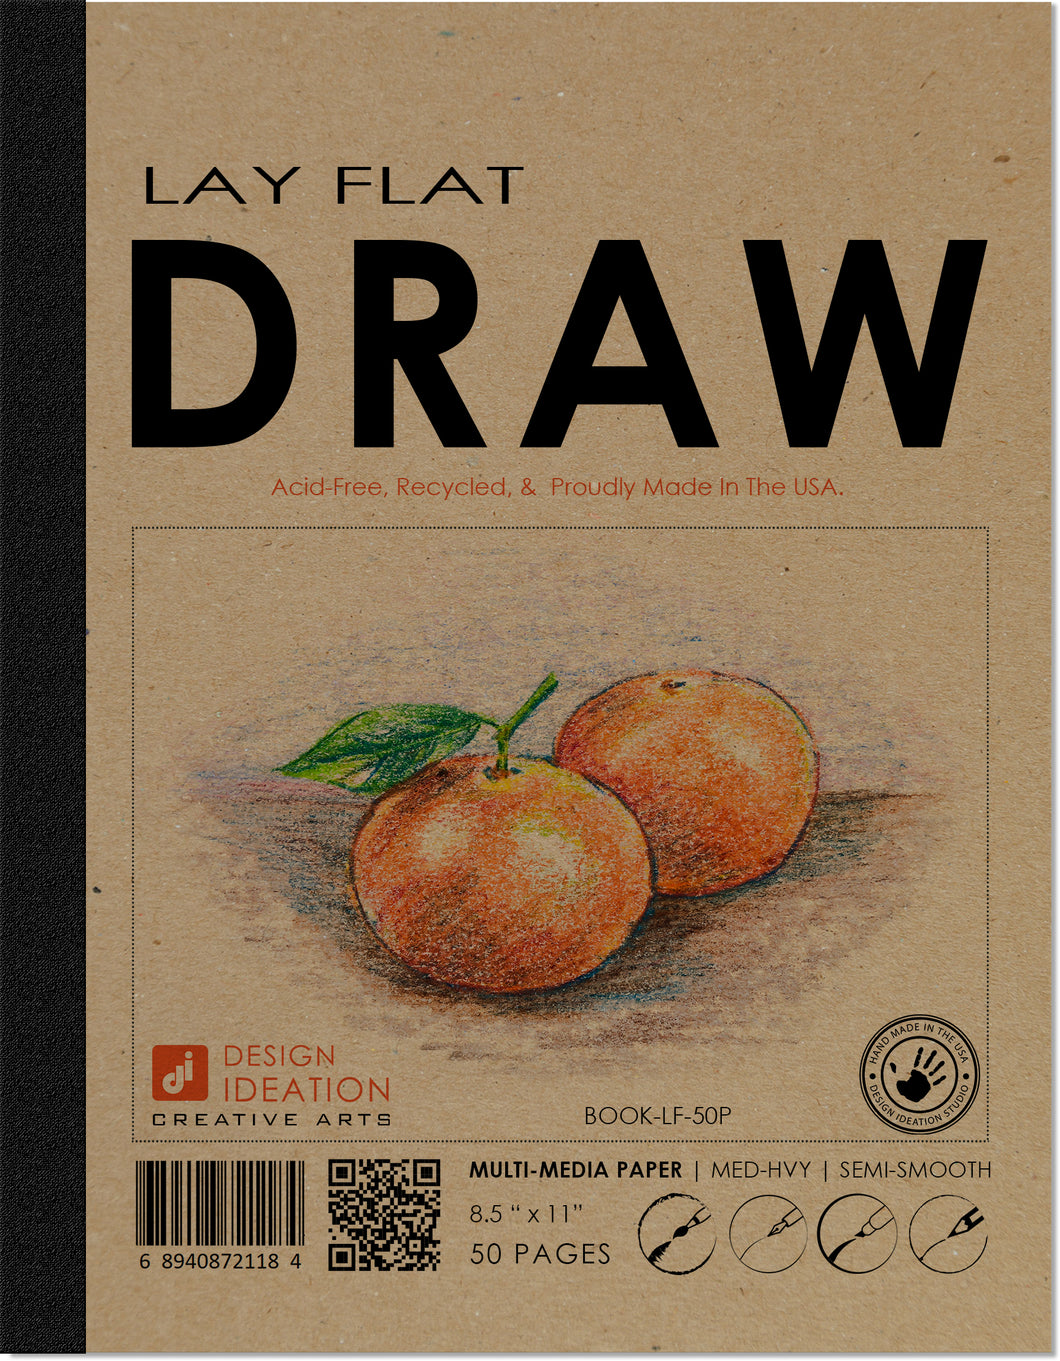 LAY FLAT sketchbook. Removable sheet, journal style DRAW book. Multi-media. (8.5